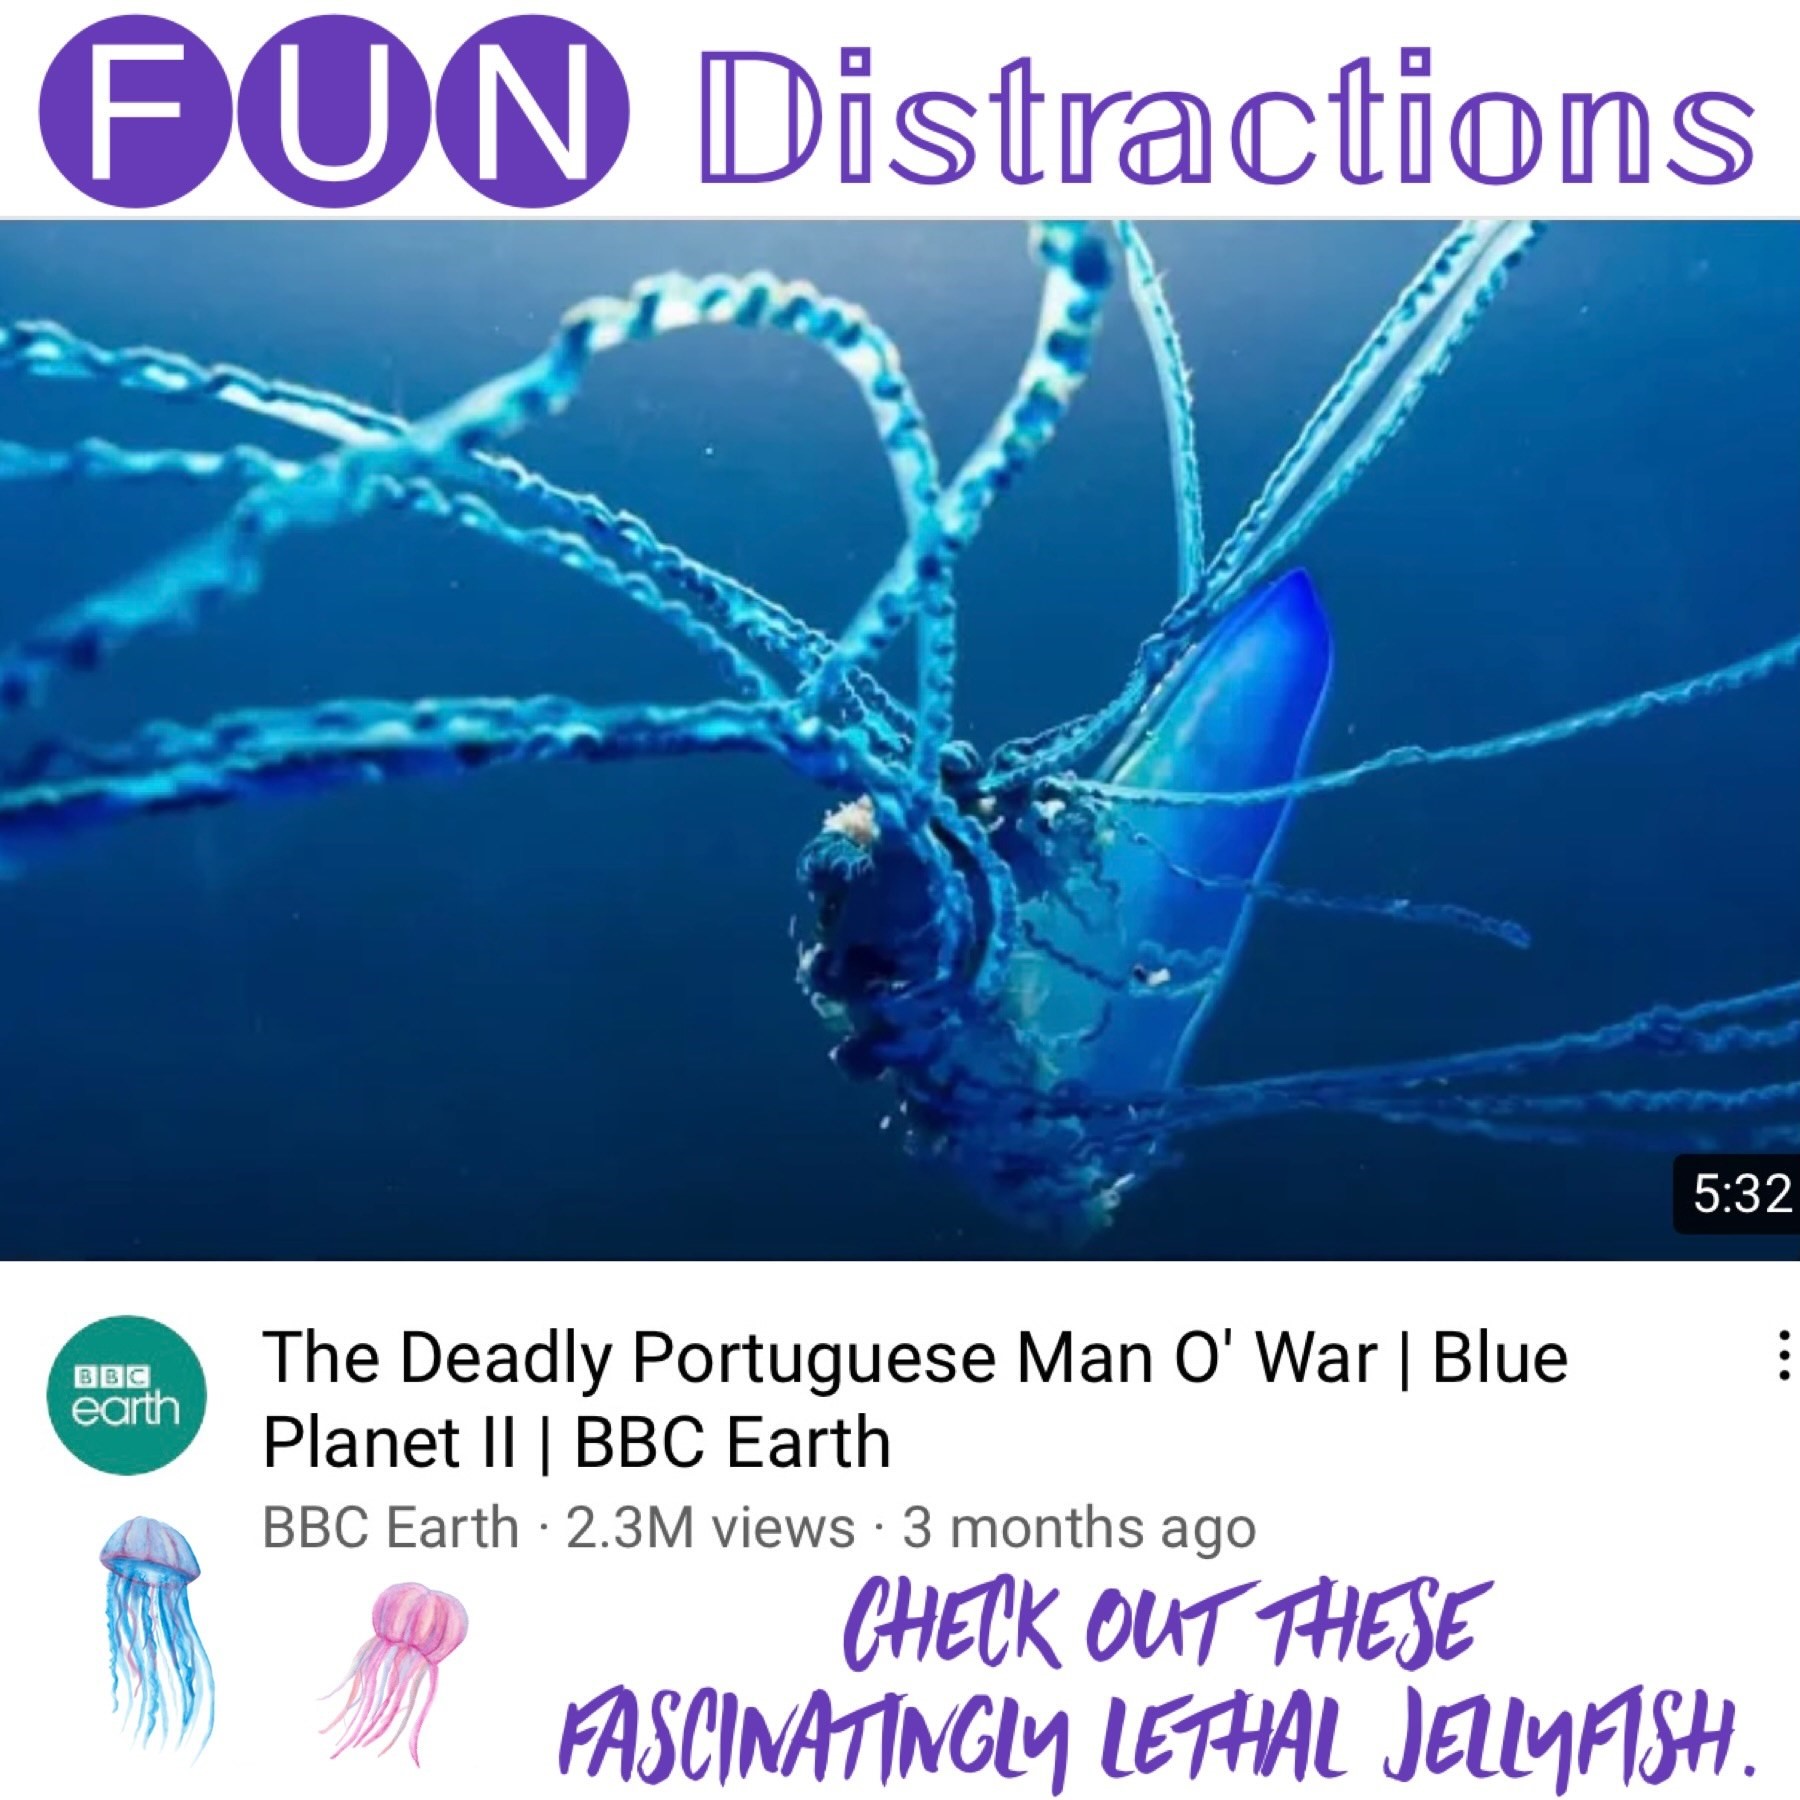 Image advertising the Library’s FUN Distractions series post about Man O’ War jellyfish